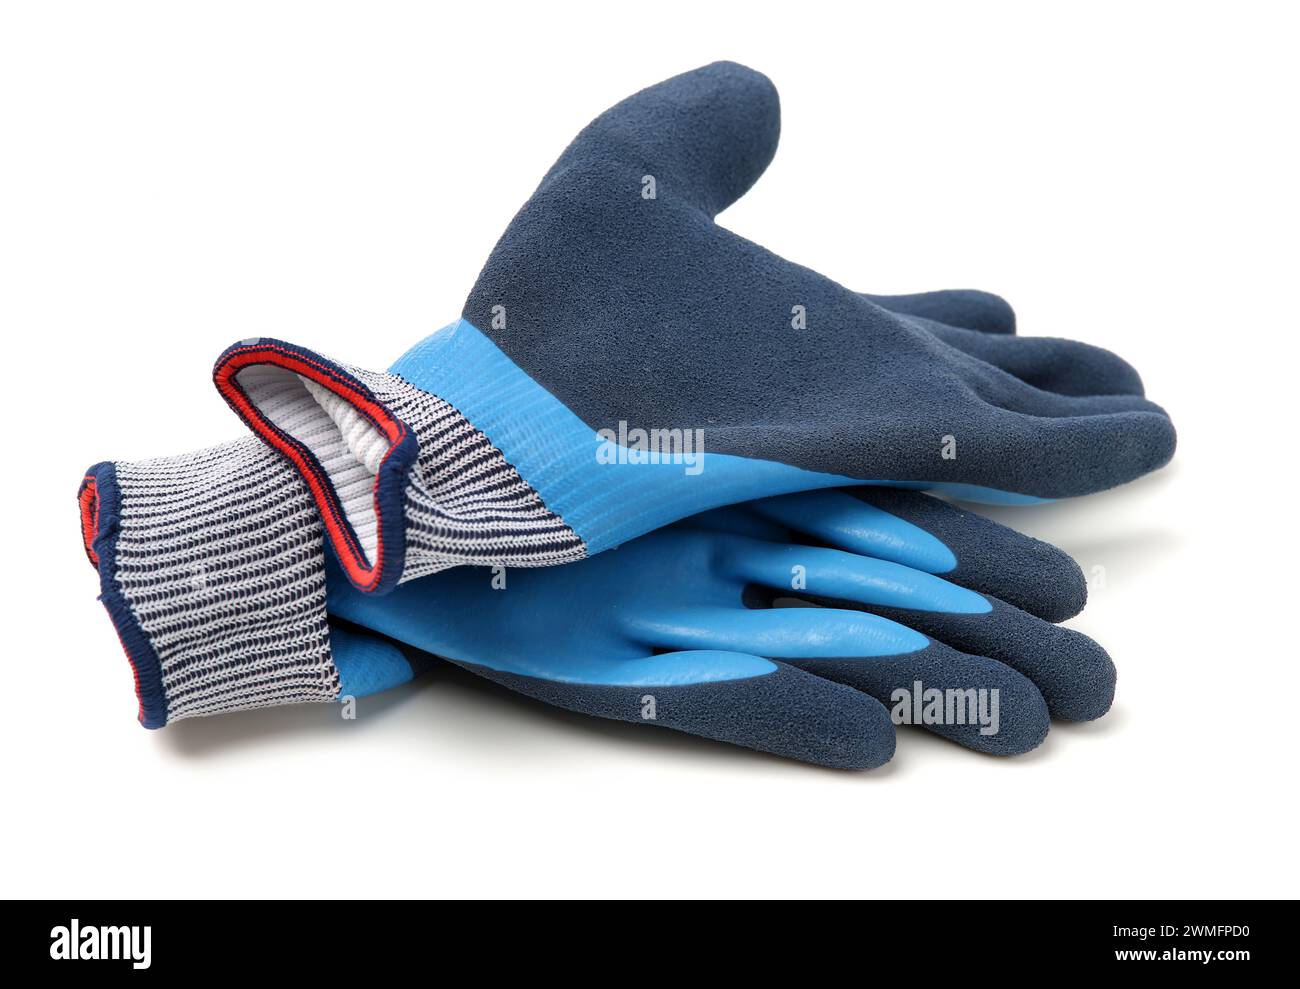 Pair of b'lu textile work gloves with protective rubber layer isolated on white background with soft shadow Stock Photo